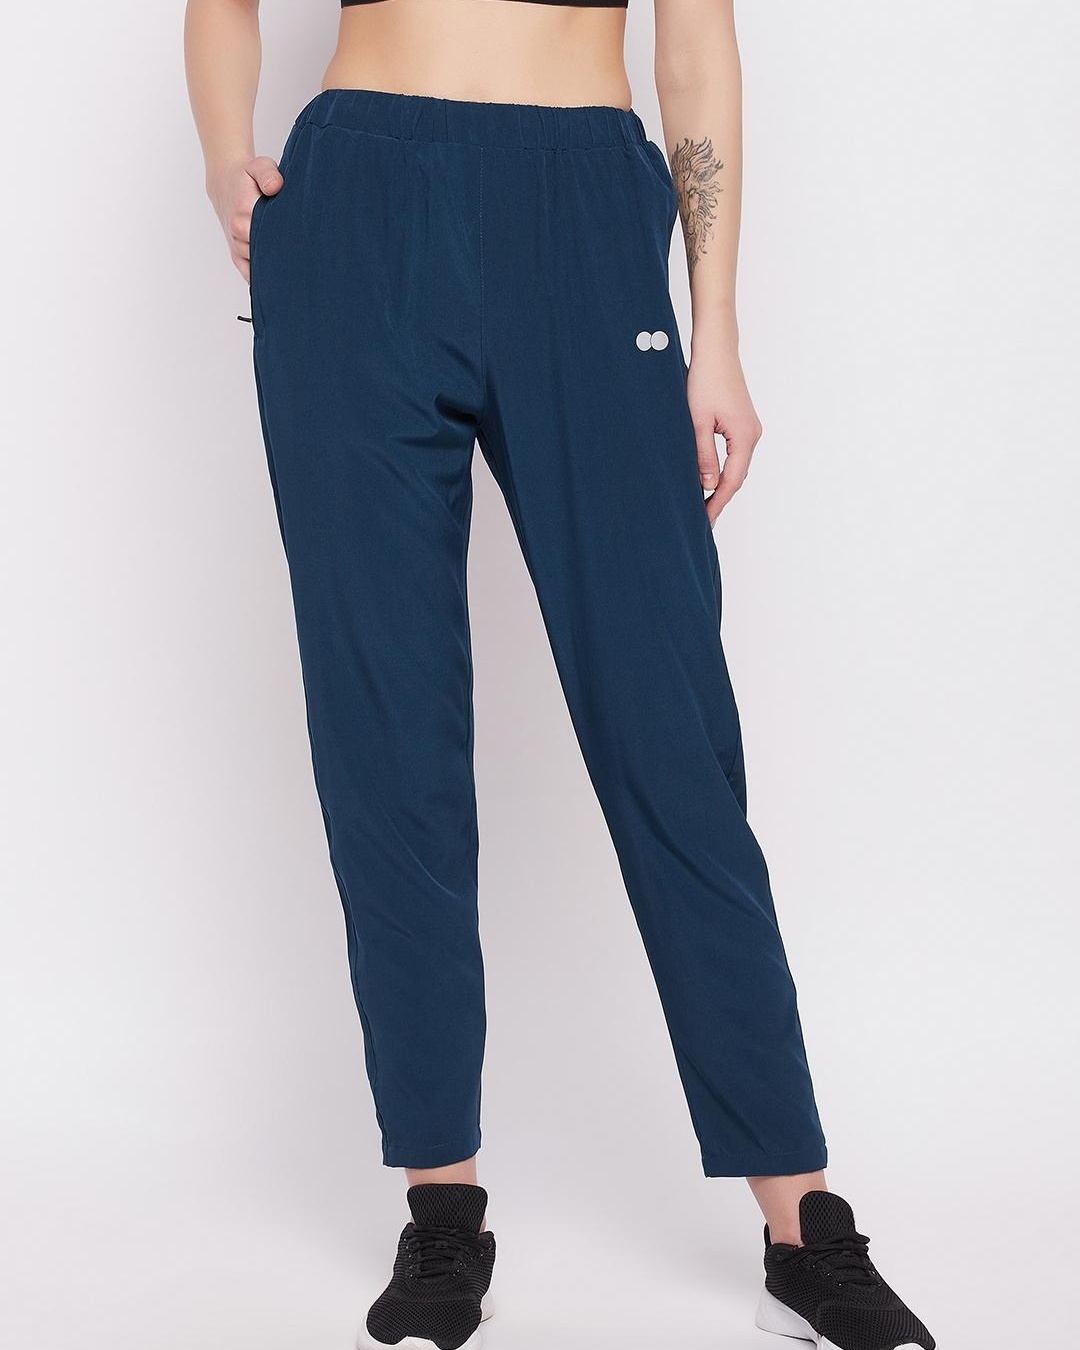 NAFIA FASHION Solid Women Blue Track Pants - Buy NAFIA FASHION Solid Women  Blue Track Pants Online at Best Prices in India | Flipkart.com